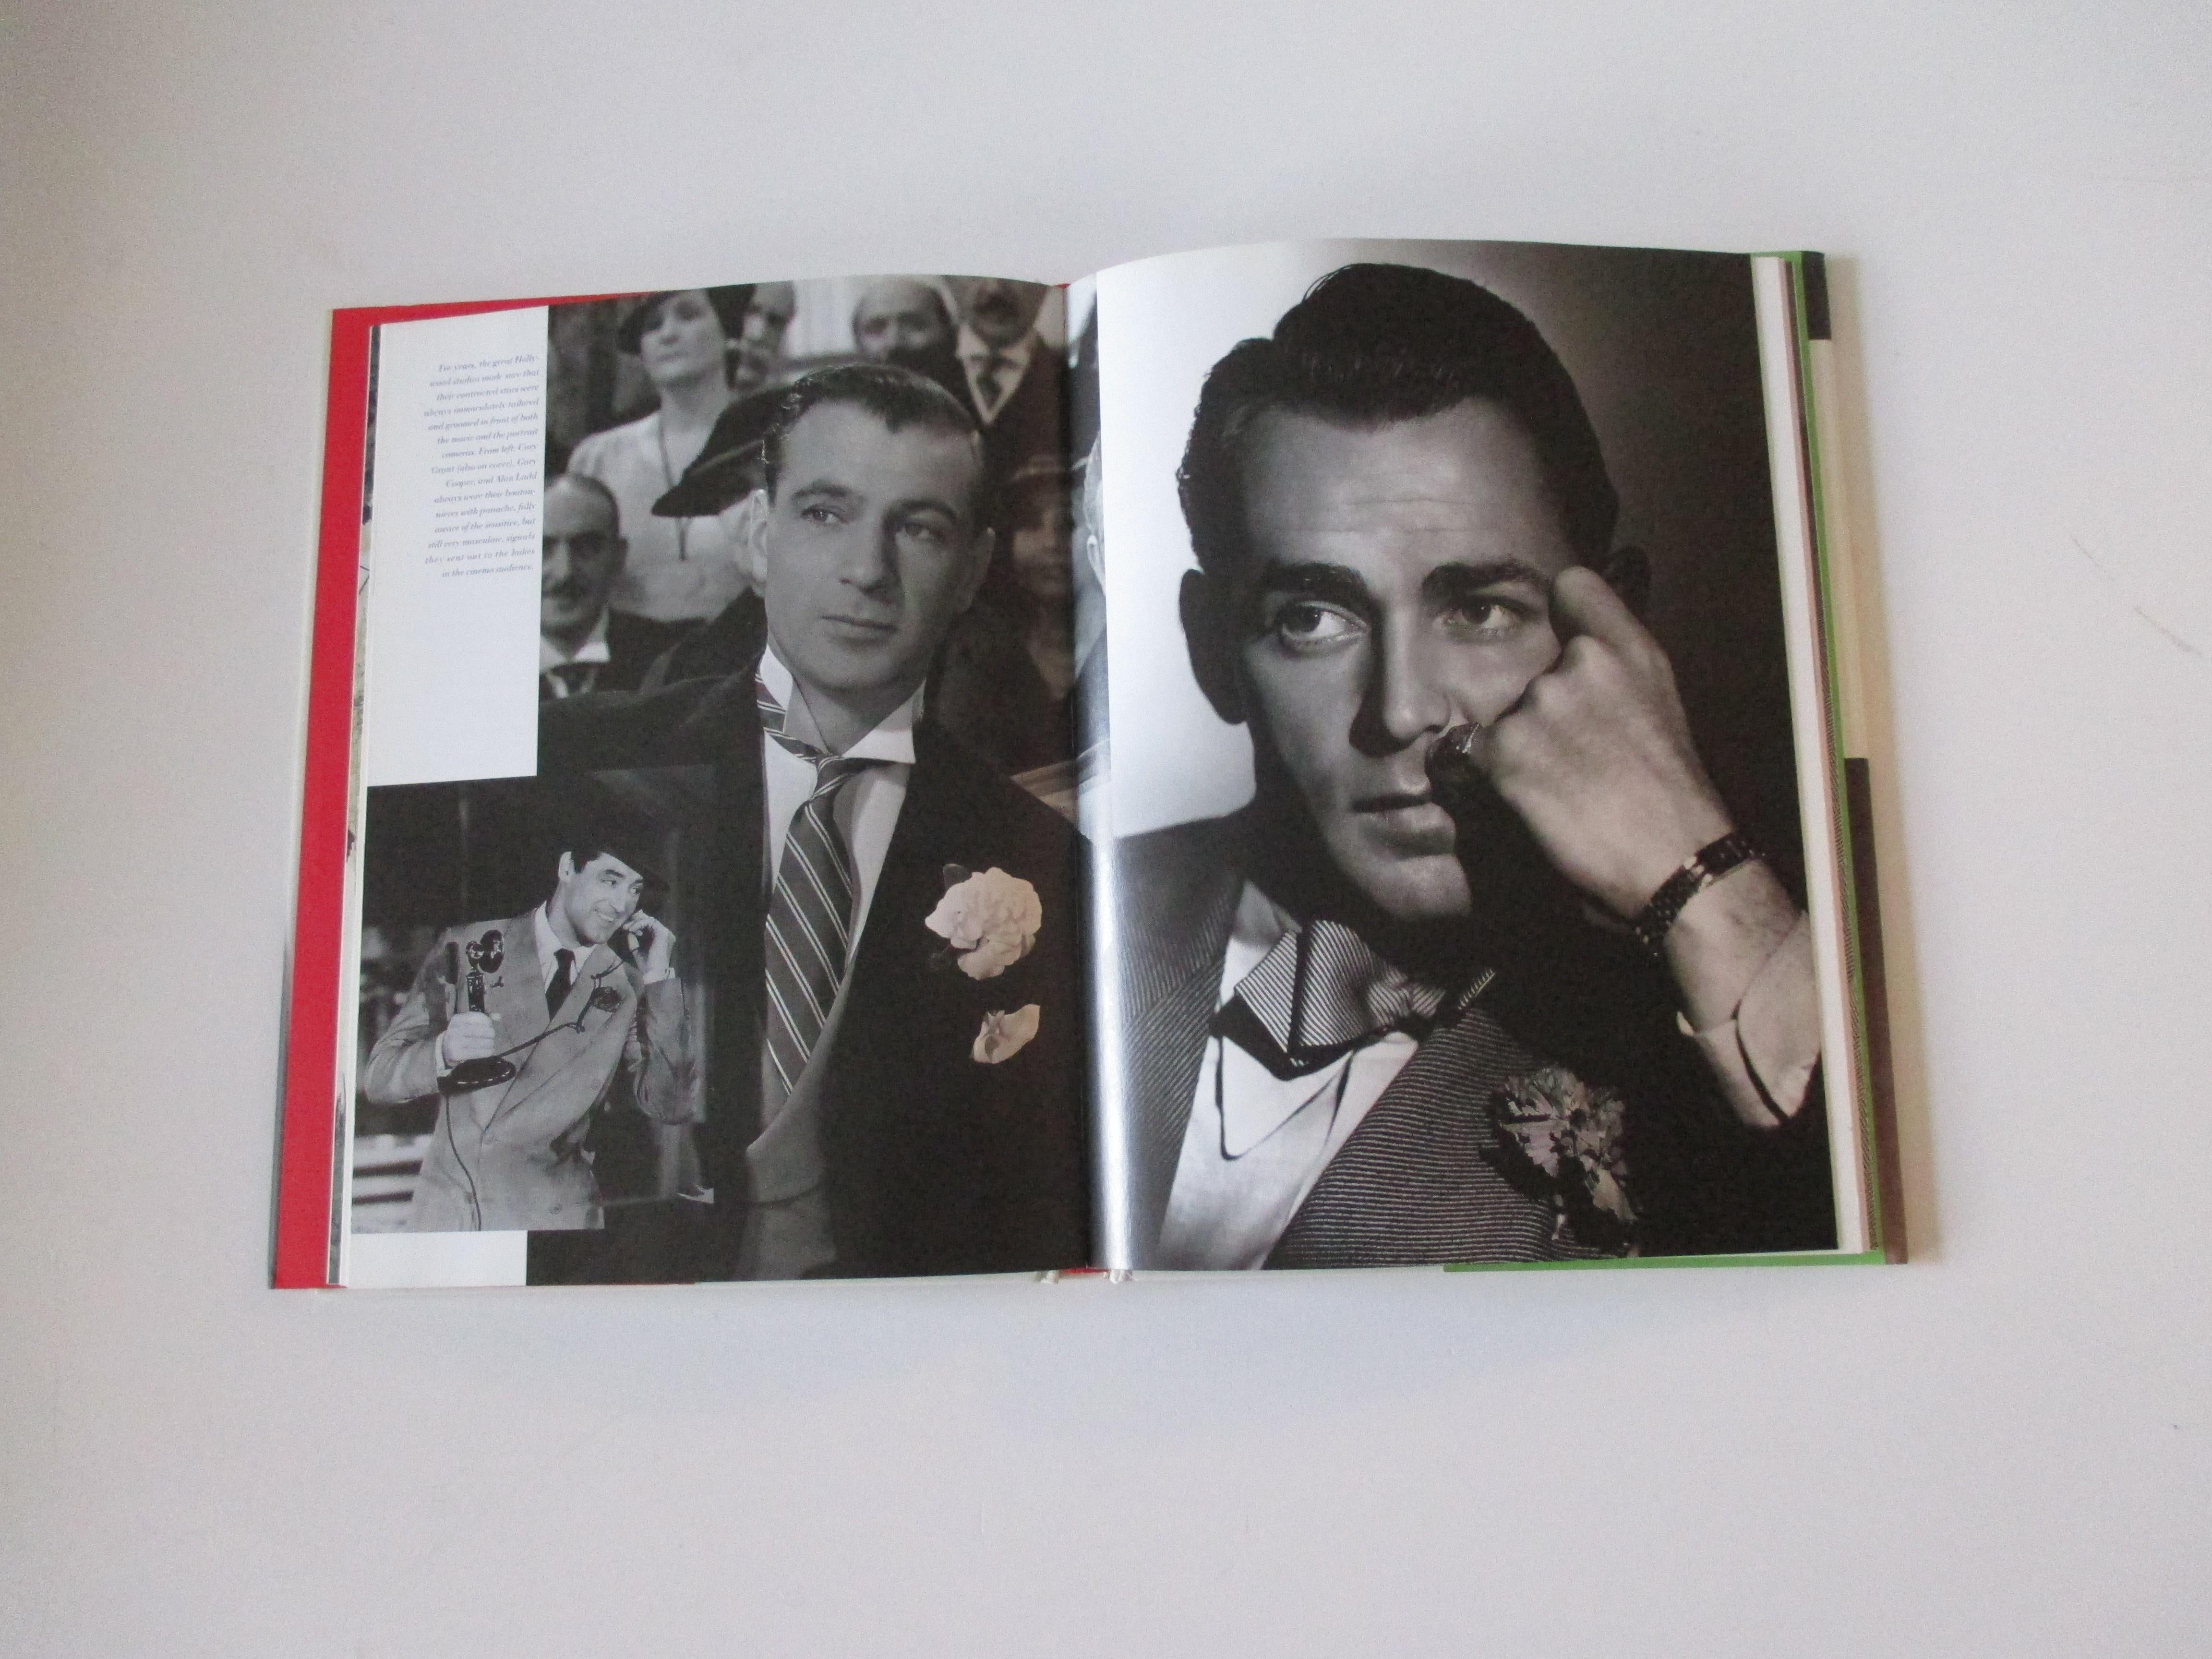 The Boutonniere Style in One's Lapel vintage book
By Umberto Angeloni of Brioni
96 Pages,
USA, 2000
Measures: 7 x 9 x 0.25.